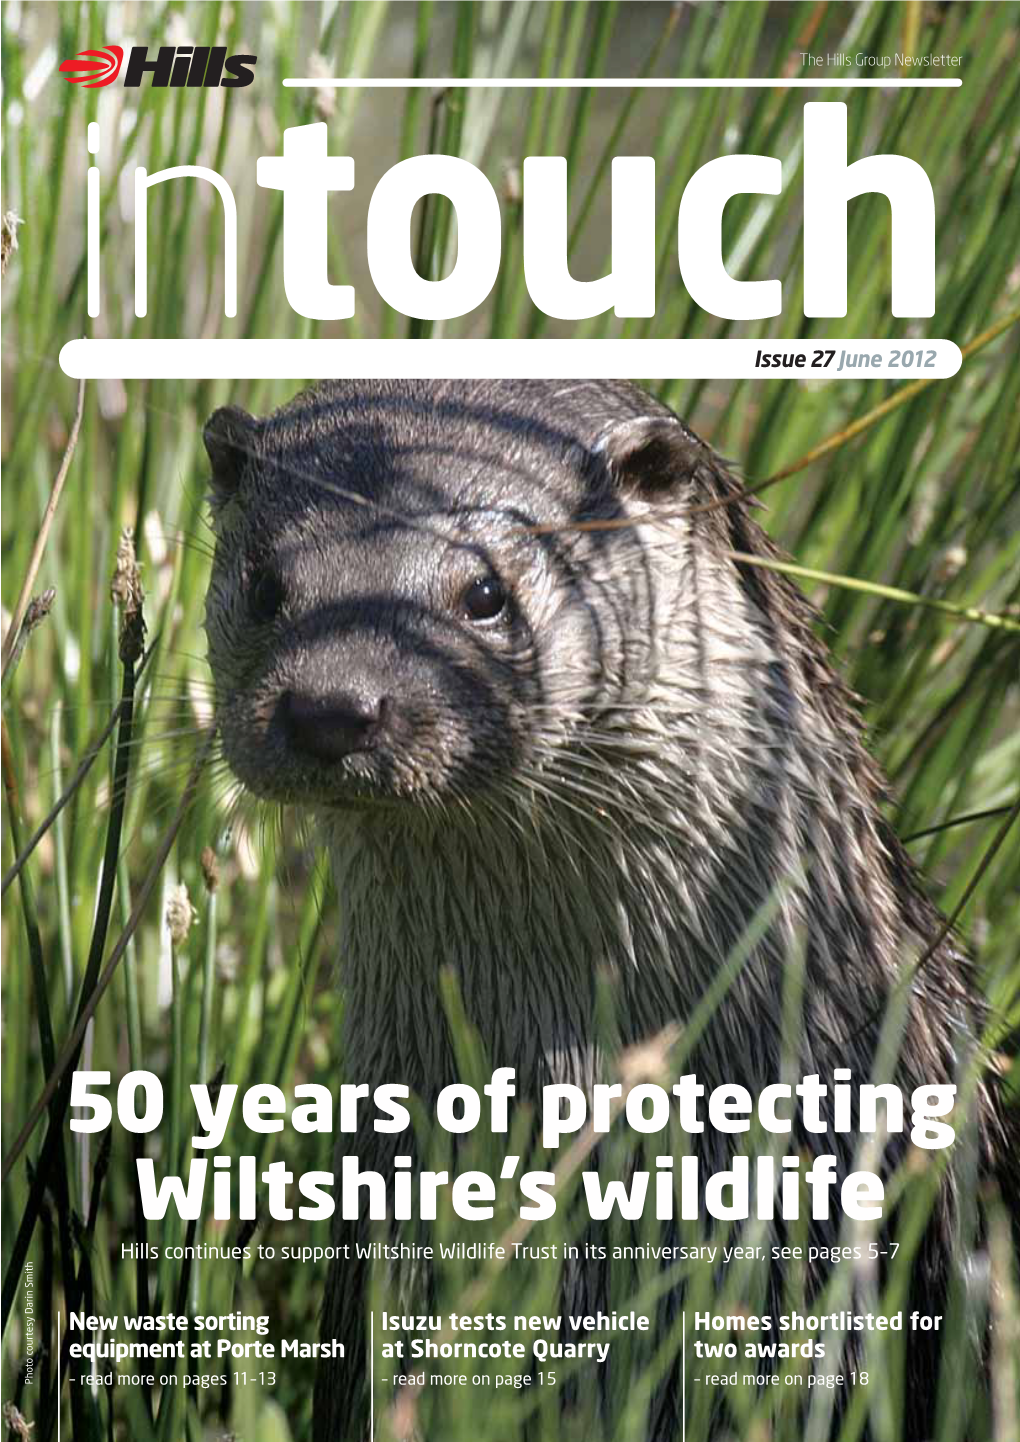 50 Years of Protecting Wiltshire's Wildlife